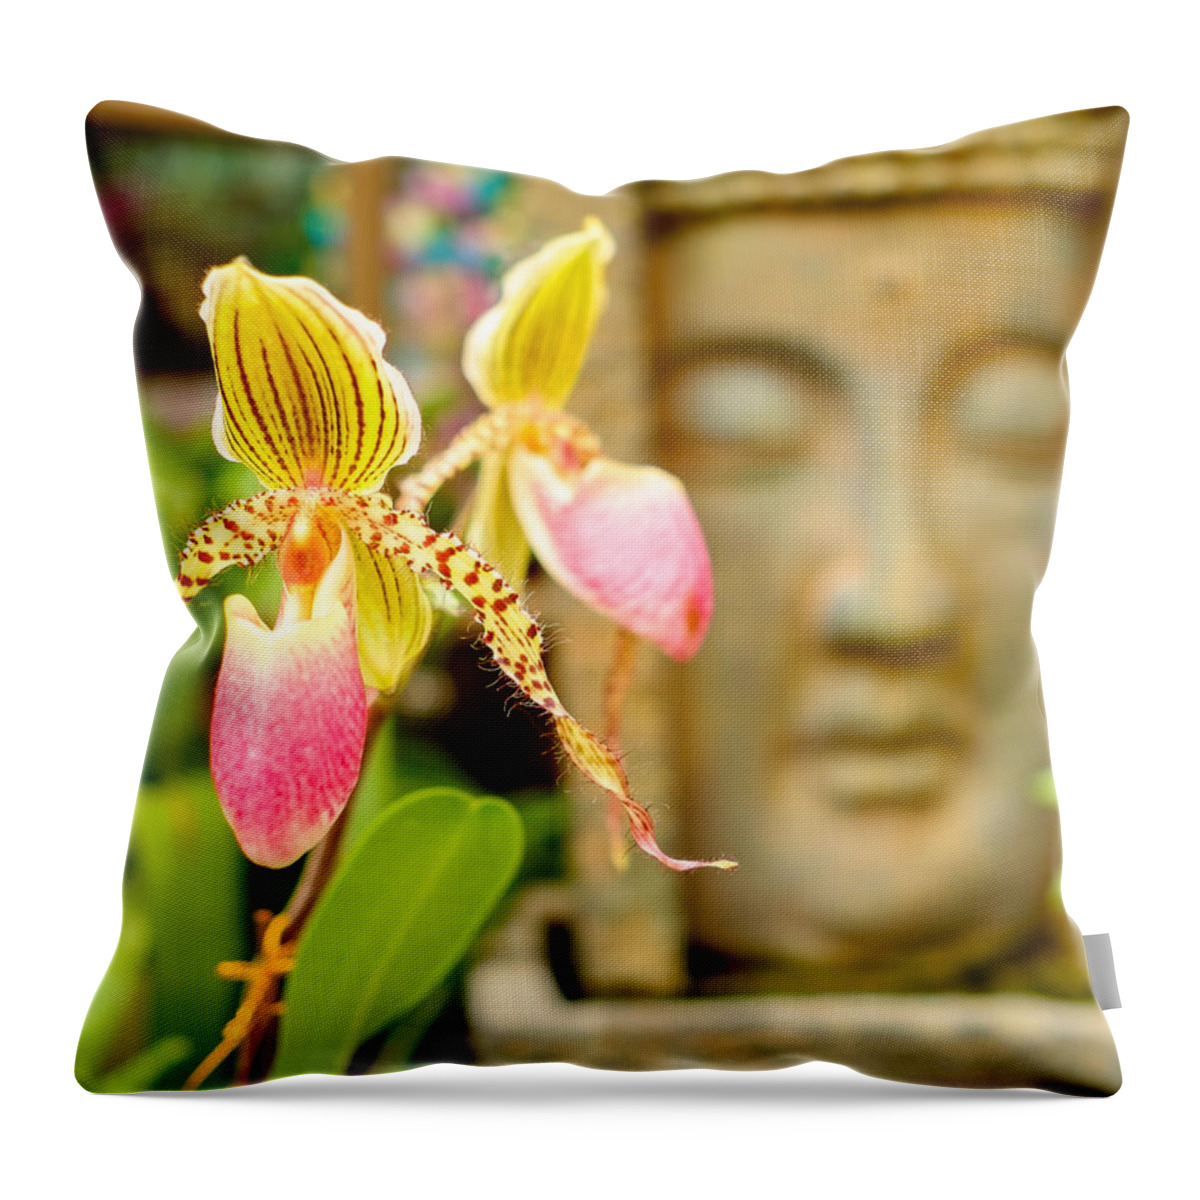 Buddhist Temple Throw Pillow featuring the photograph Pretty flower by Raul Rodriguez